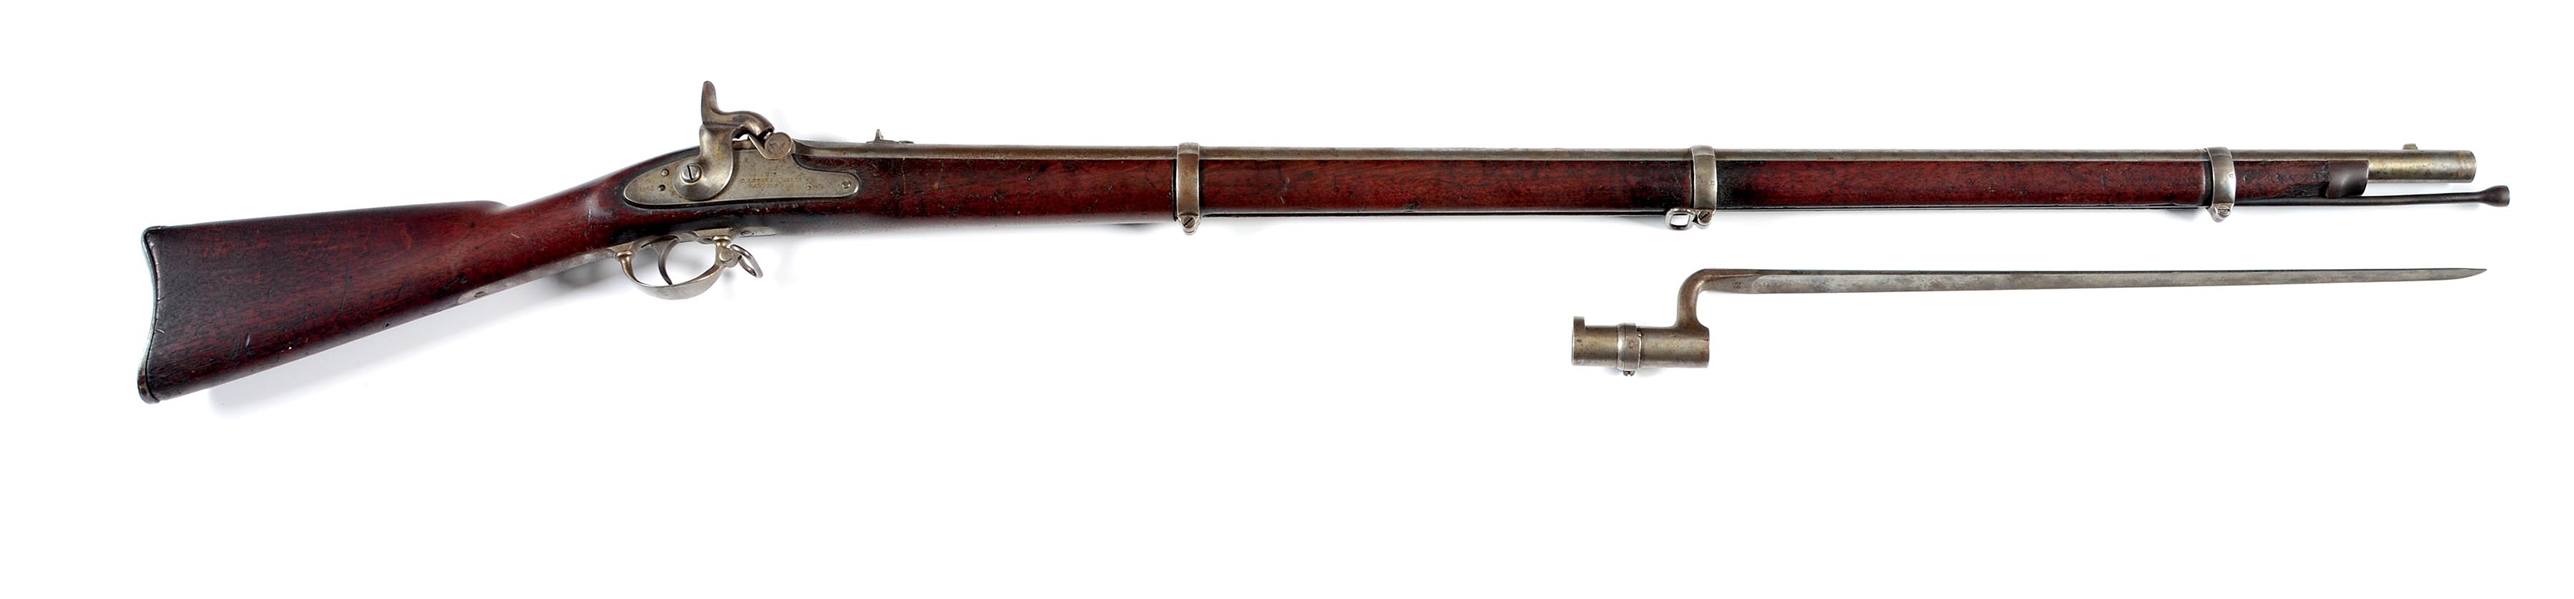 (A) IDENTIFIED COLT MODEL 1861 SPECIAL PERCUSSION RIFLE MUSKET WITH BAYONET ATTRIBUTED TO 3RD PENNSYLVANIA ARTILLERY.